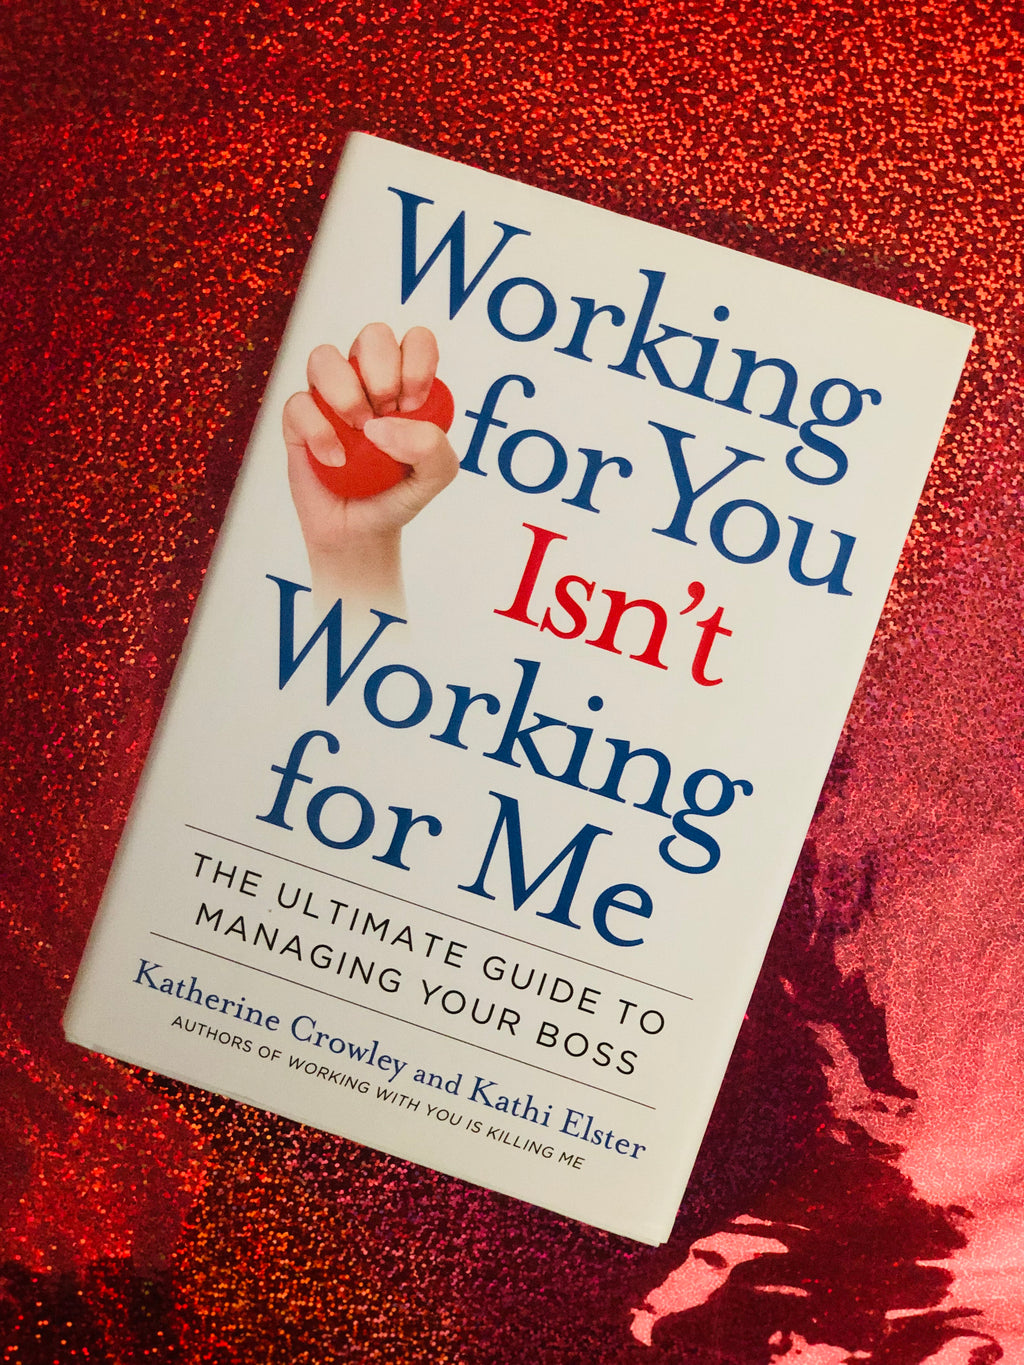 Working For You Isn't Working For Me- By Katherine Crowley & Kathi Elster